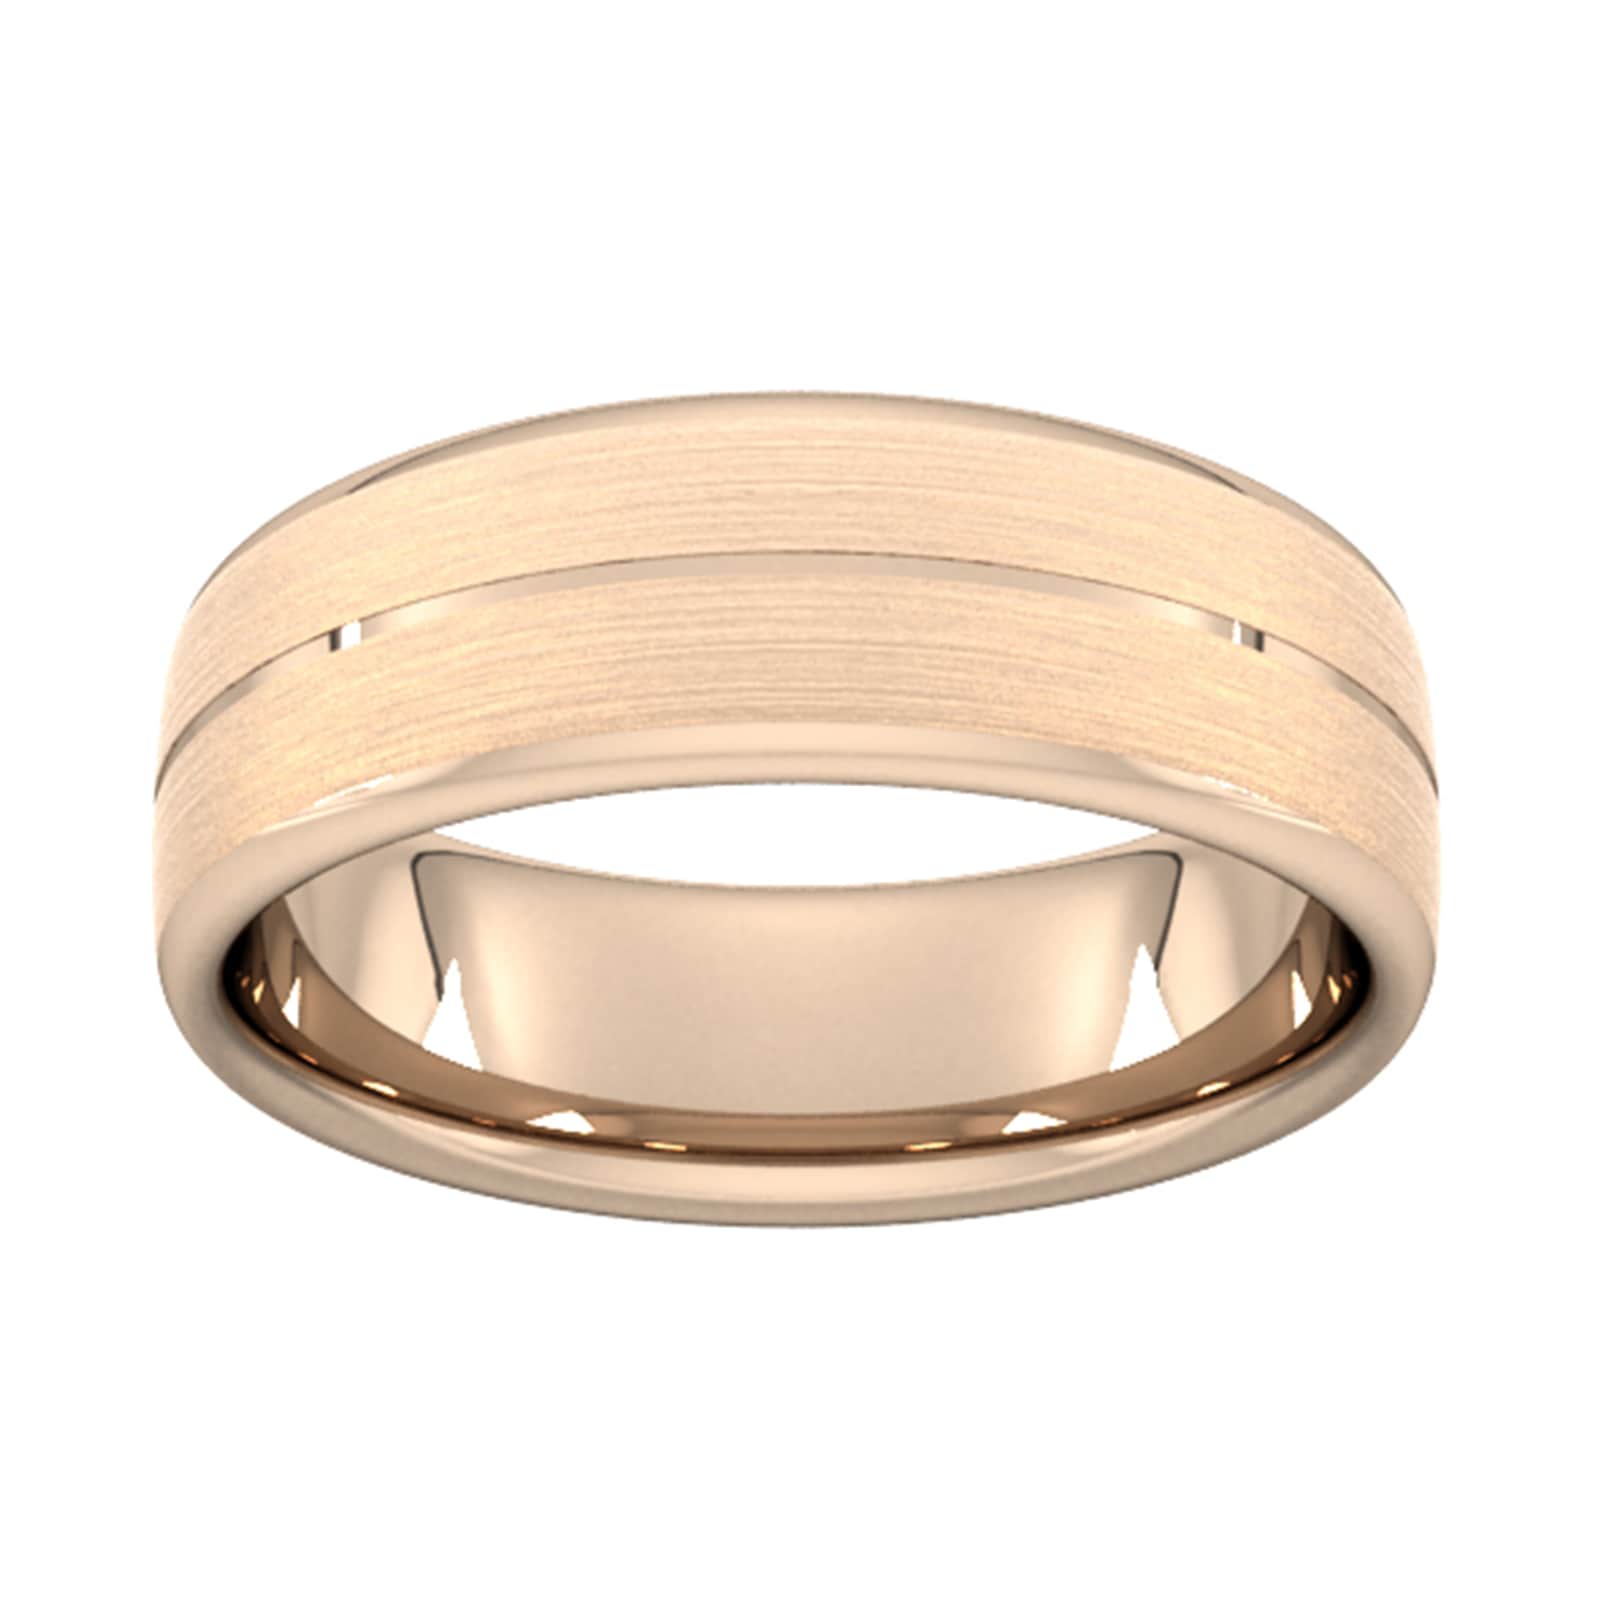 7mm Traditional Court Heavy Centre Groove With Chamfered Edge Wedding Ring In 18 Carat Rose Gold - Ring Size K